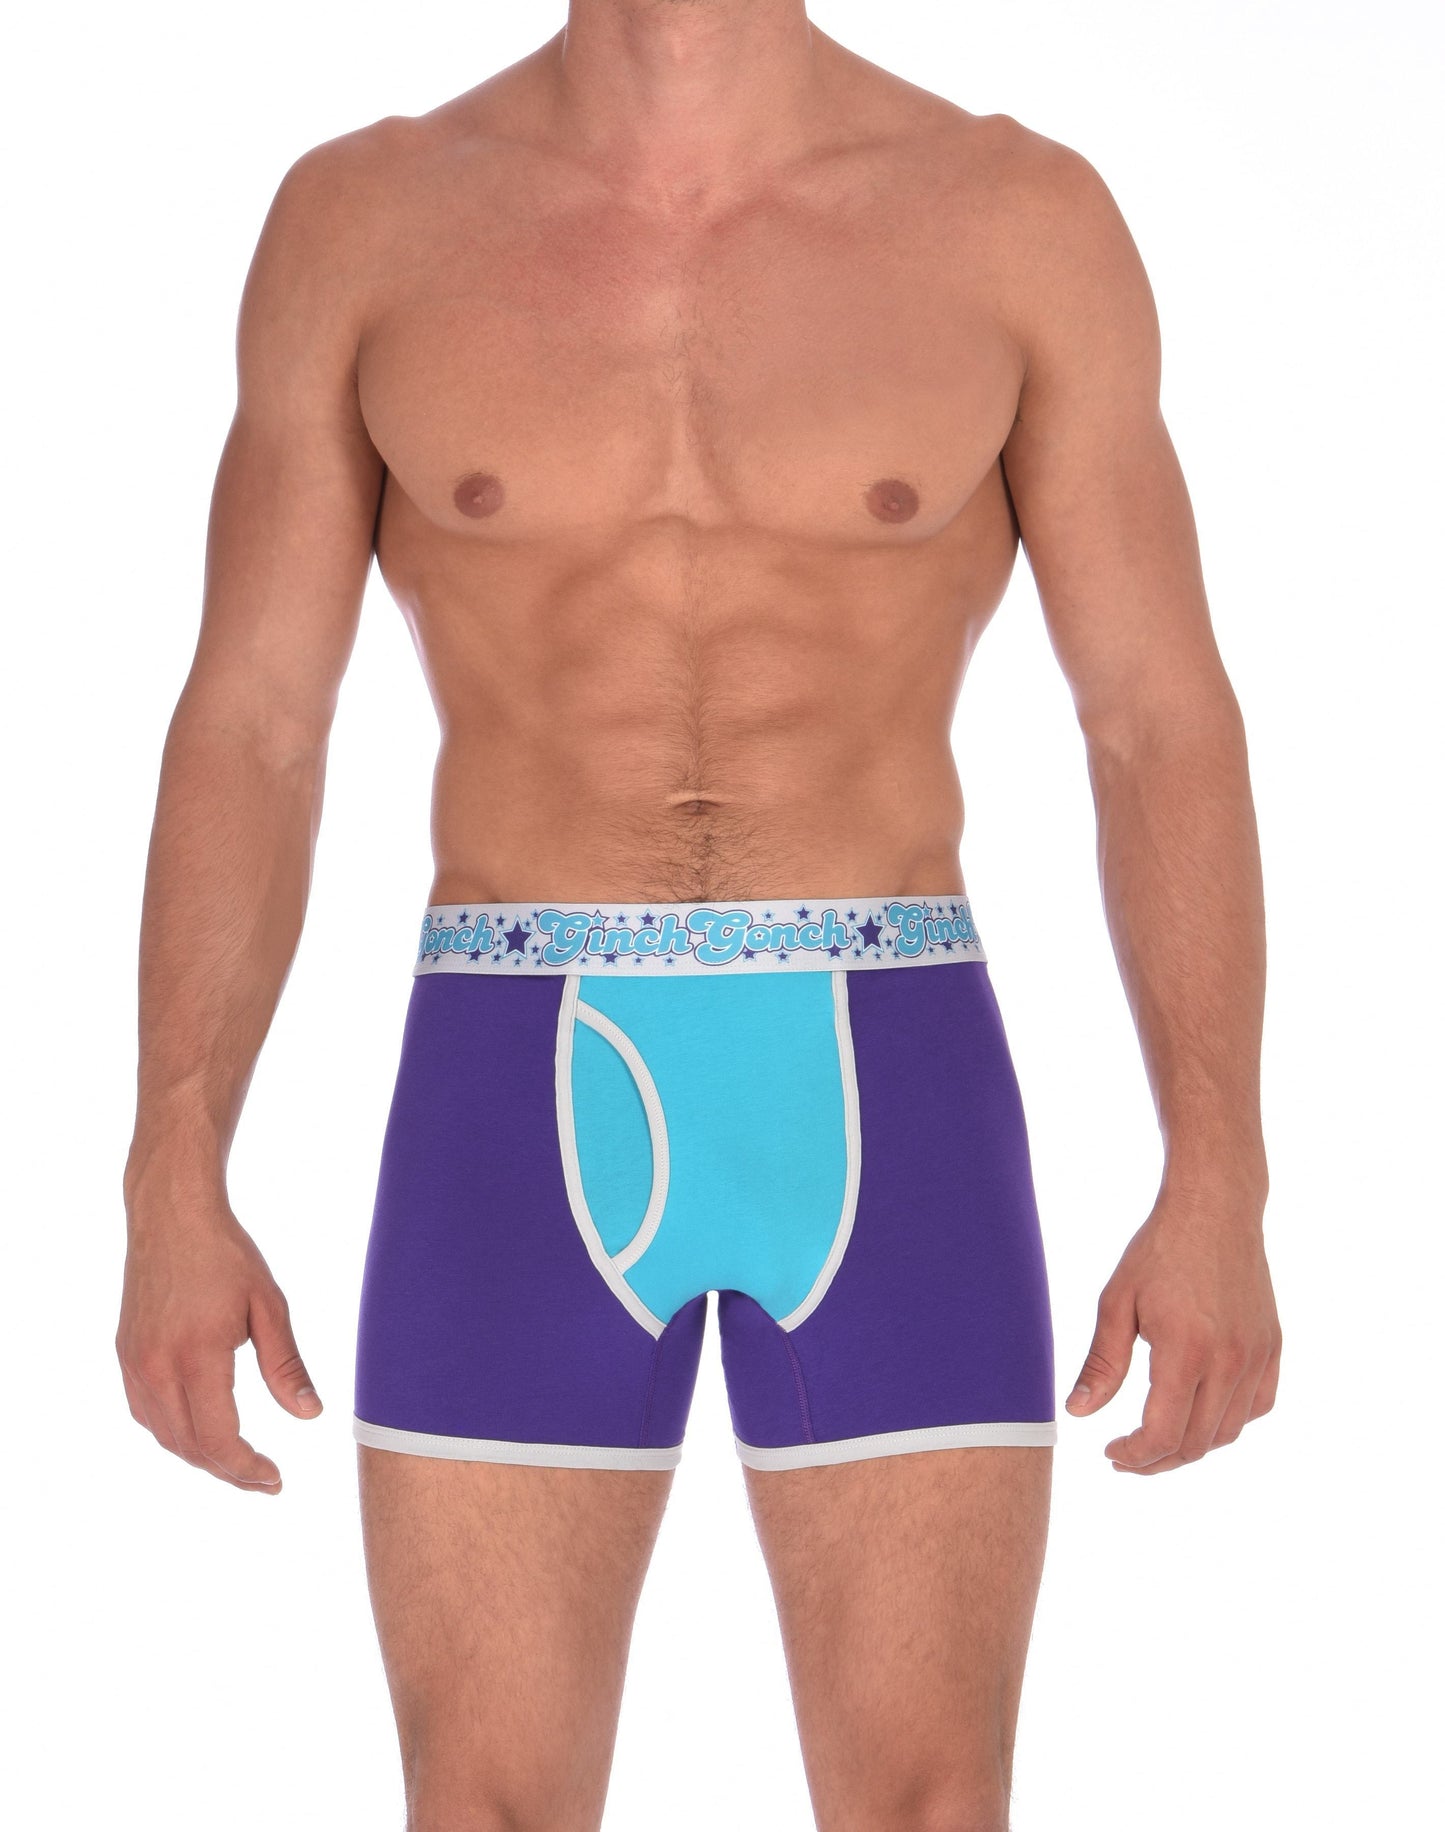 GG Ginch Gonch Purple Haze Boxer Brief y front - Men's Underwear purple and aqua panels with grey trim and silver printed waistband front 